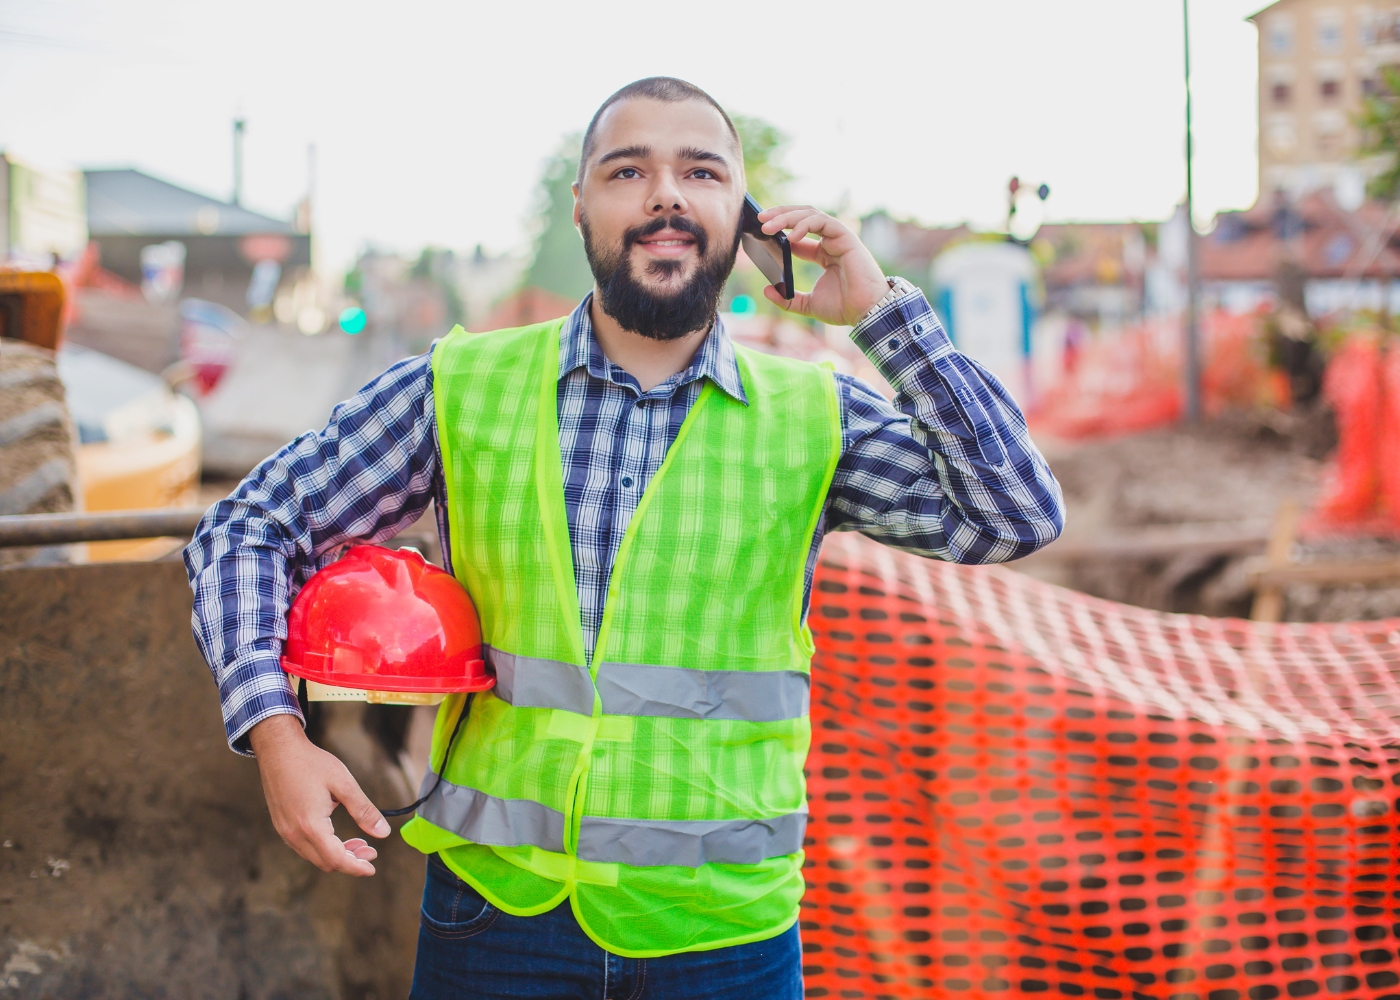 Lead Generation by The King of Marketing - a construction company owner answering a phone call from a new lead